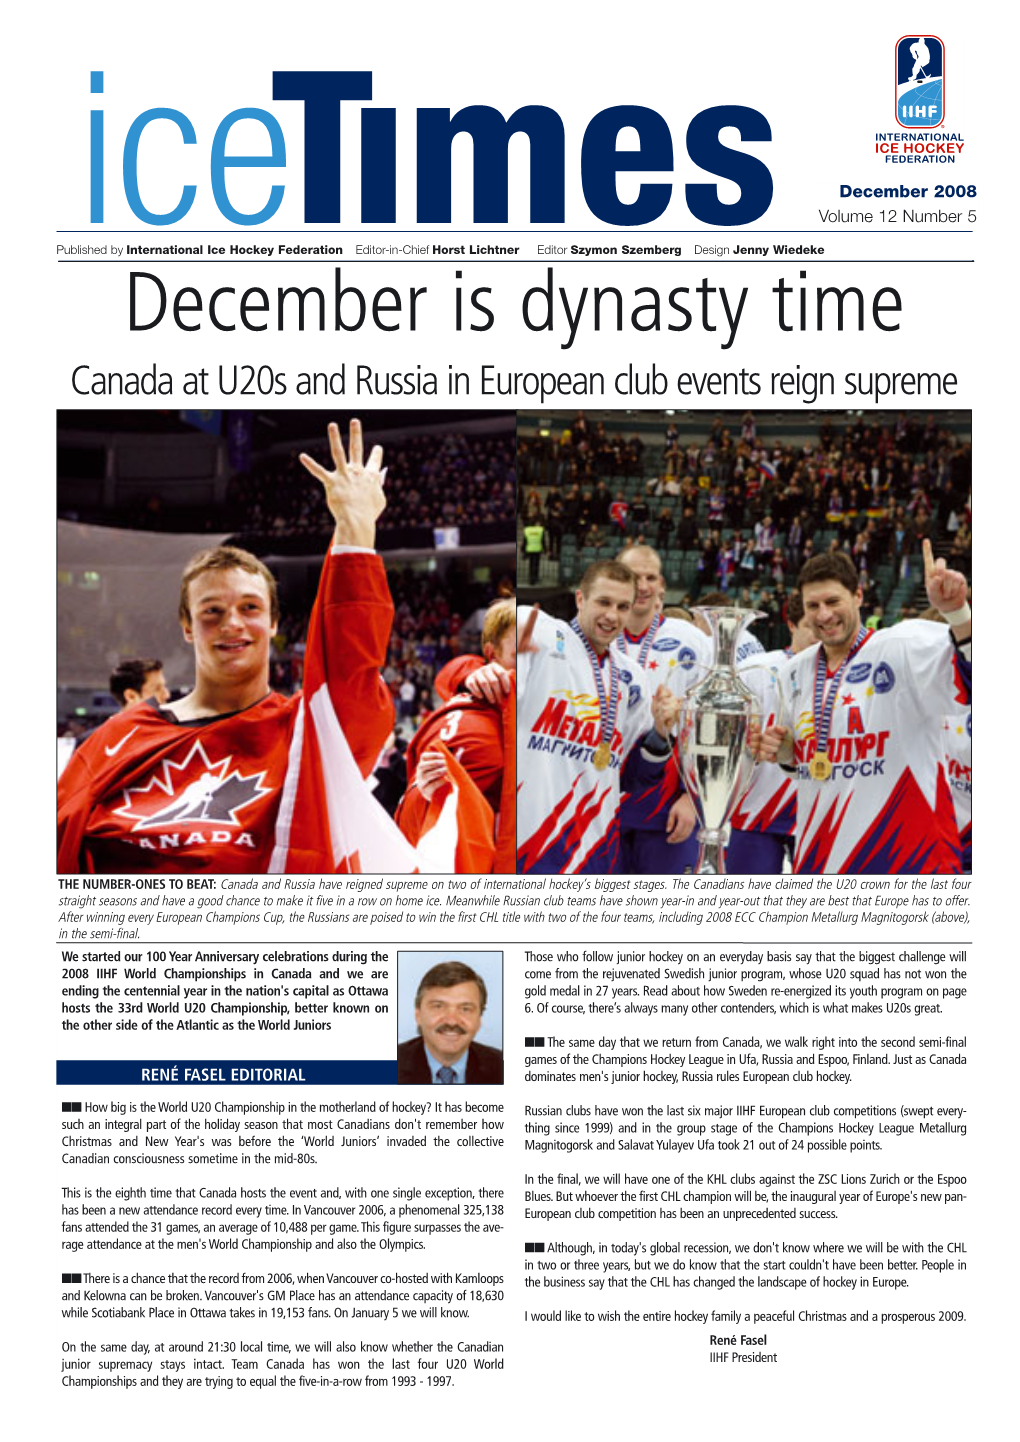 December Is Dynasty Time Canada at U20s and Russia in European Club Events Reign Supreme